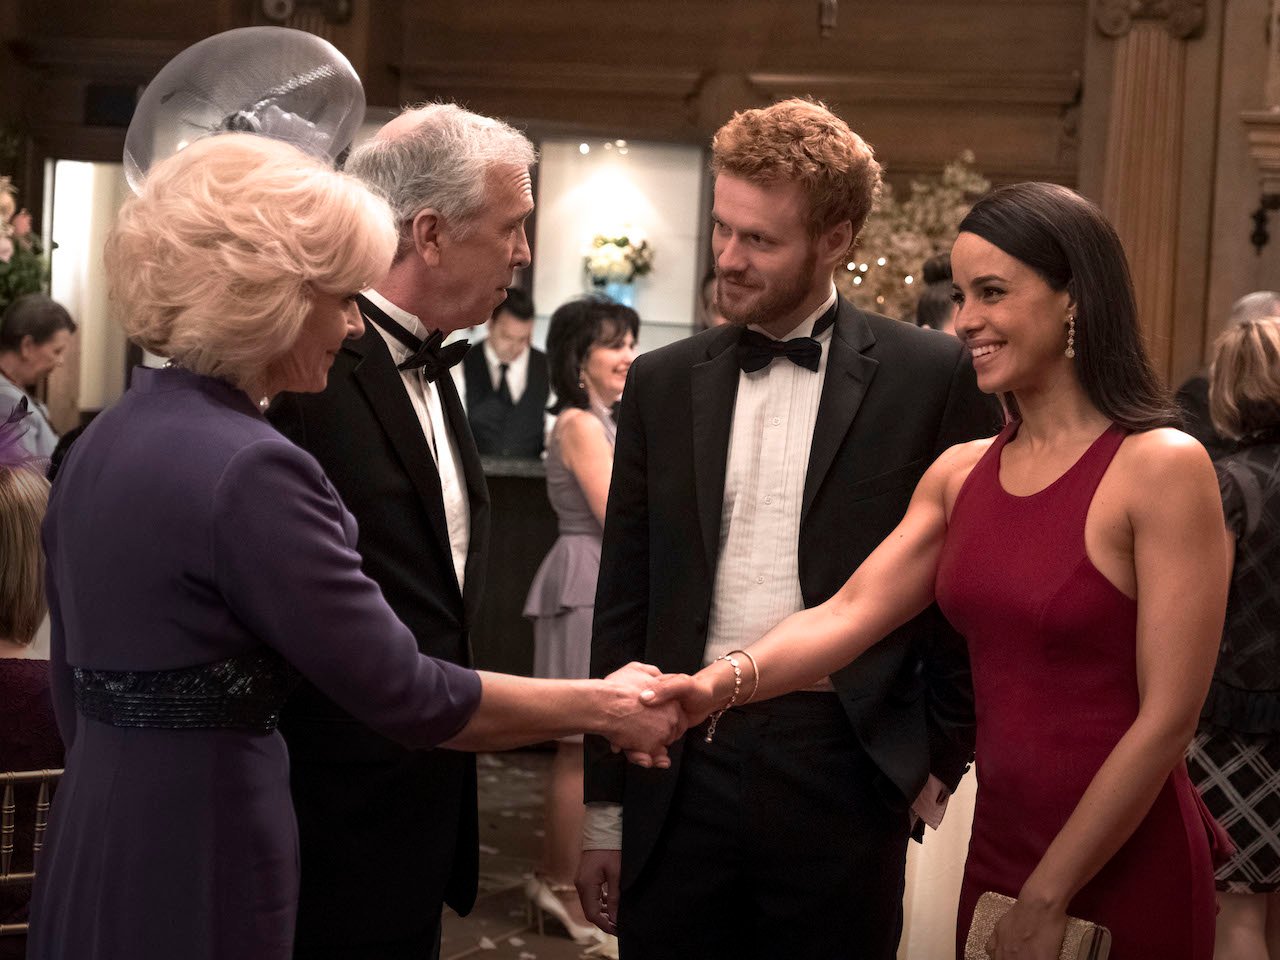 A new Lifetime movie about Harry and Meghan